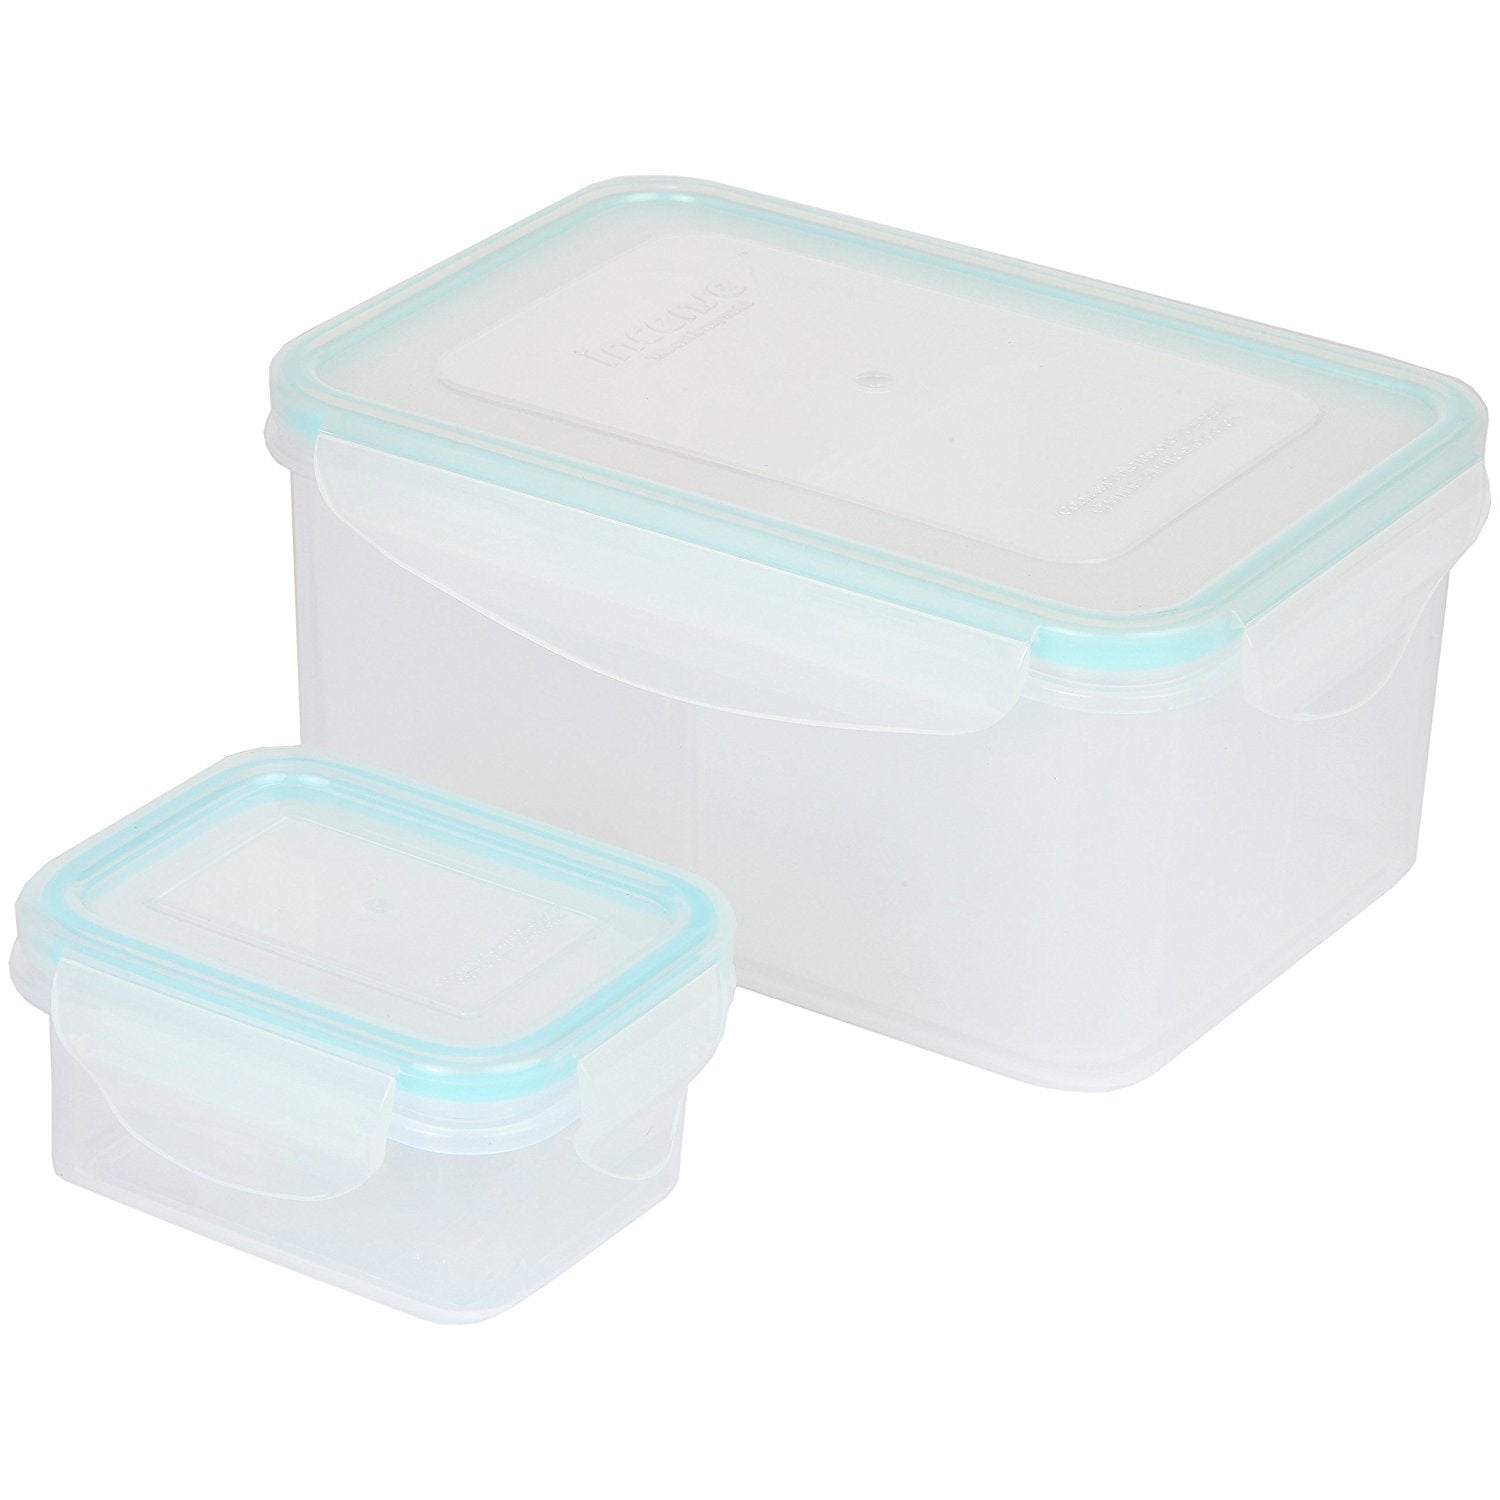 Leakproof Bento Lunch Box Set With 3 Compartments - 37 oz. (1.1 L